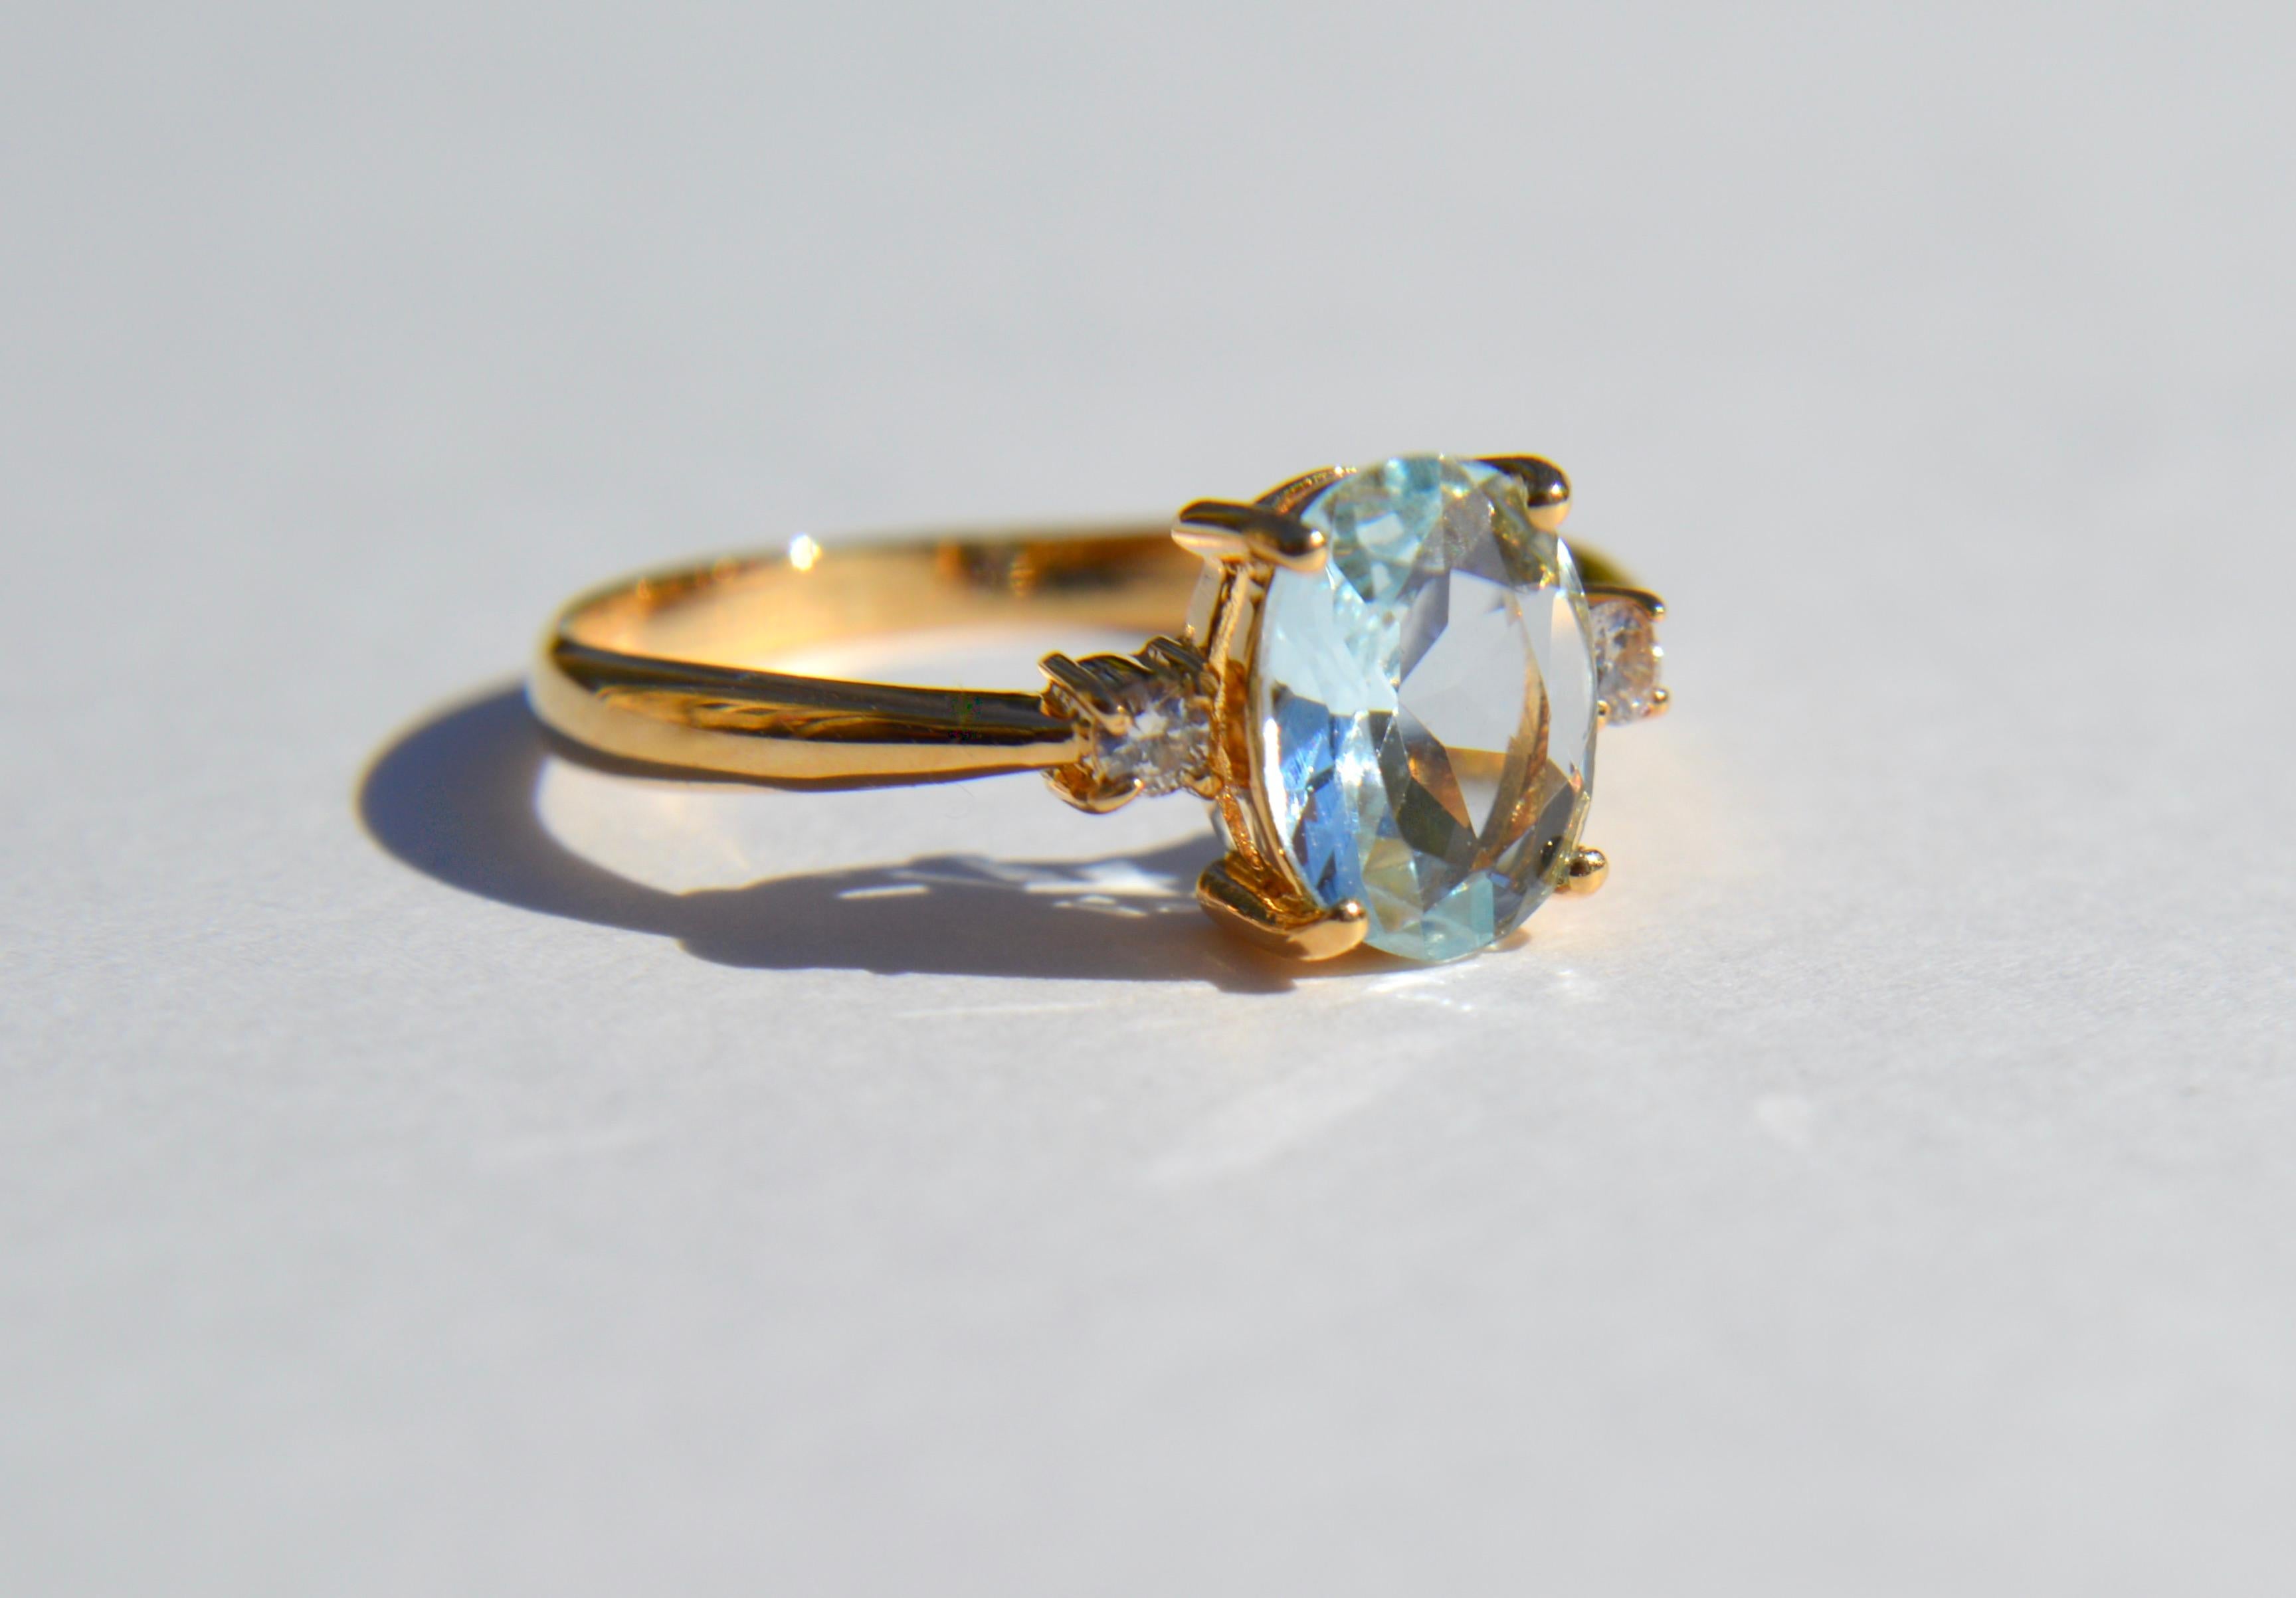 Beautiful vintage circa 1980s vintage 1.21 carat oval genuine natural aquamarine with 2 diamonds (.03 carat each) in solid 18K yellow gold. Ring is marked and tested as 18K. Size 6, can be resized by a jeweler. In very good condition. Diamonds have